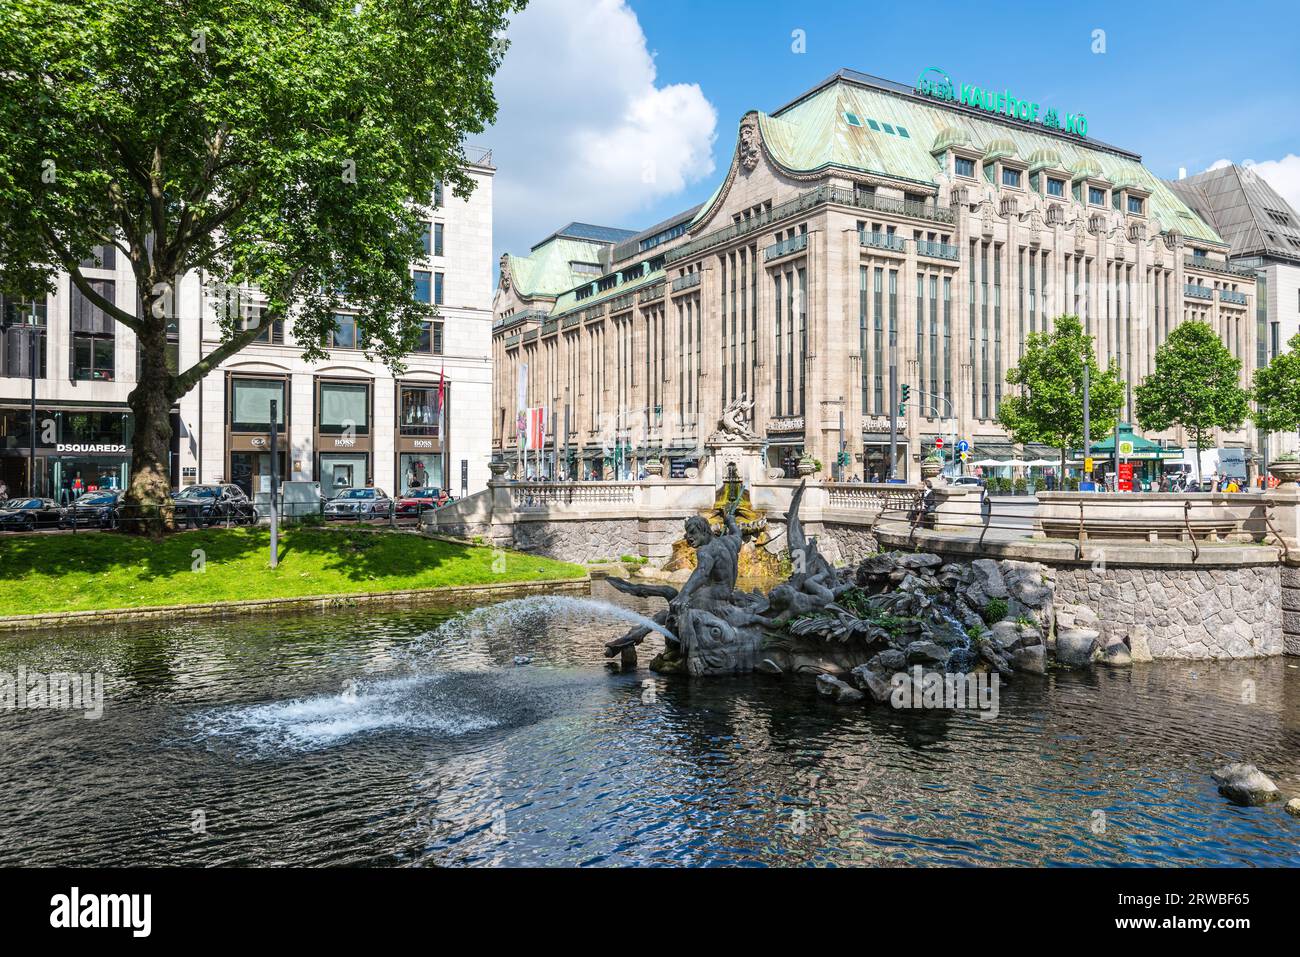 Dusseldorf, Germany - June 2, 2022: Outdoor view of Tritonenbrunnen fountain and beautiful waterside area at Konigsallee, famous shopping street, and Stock Photo